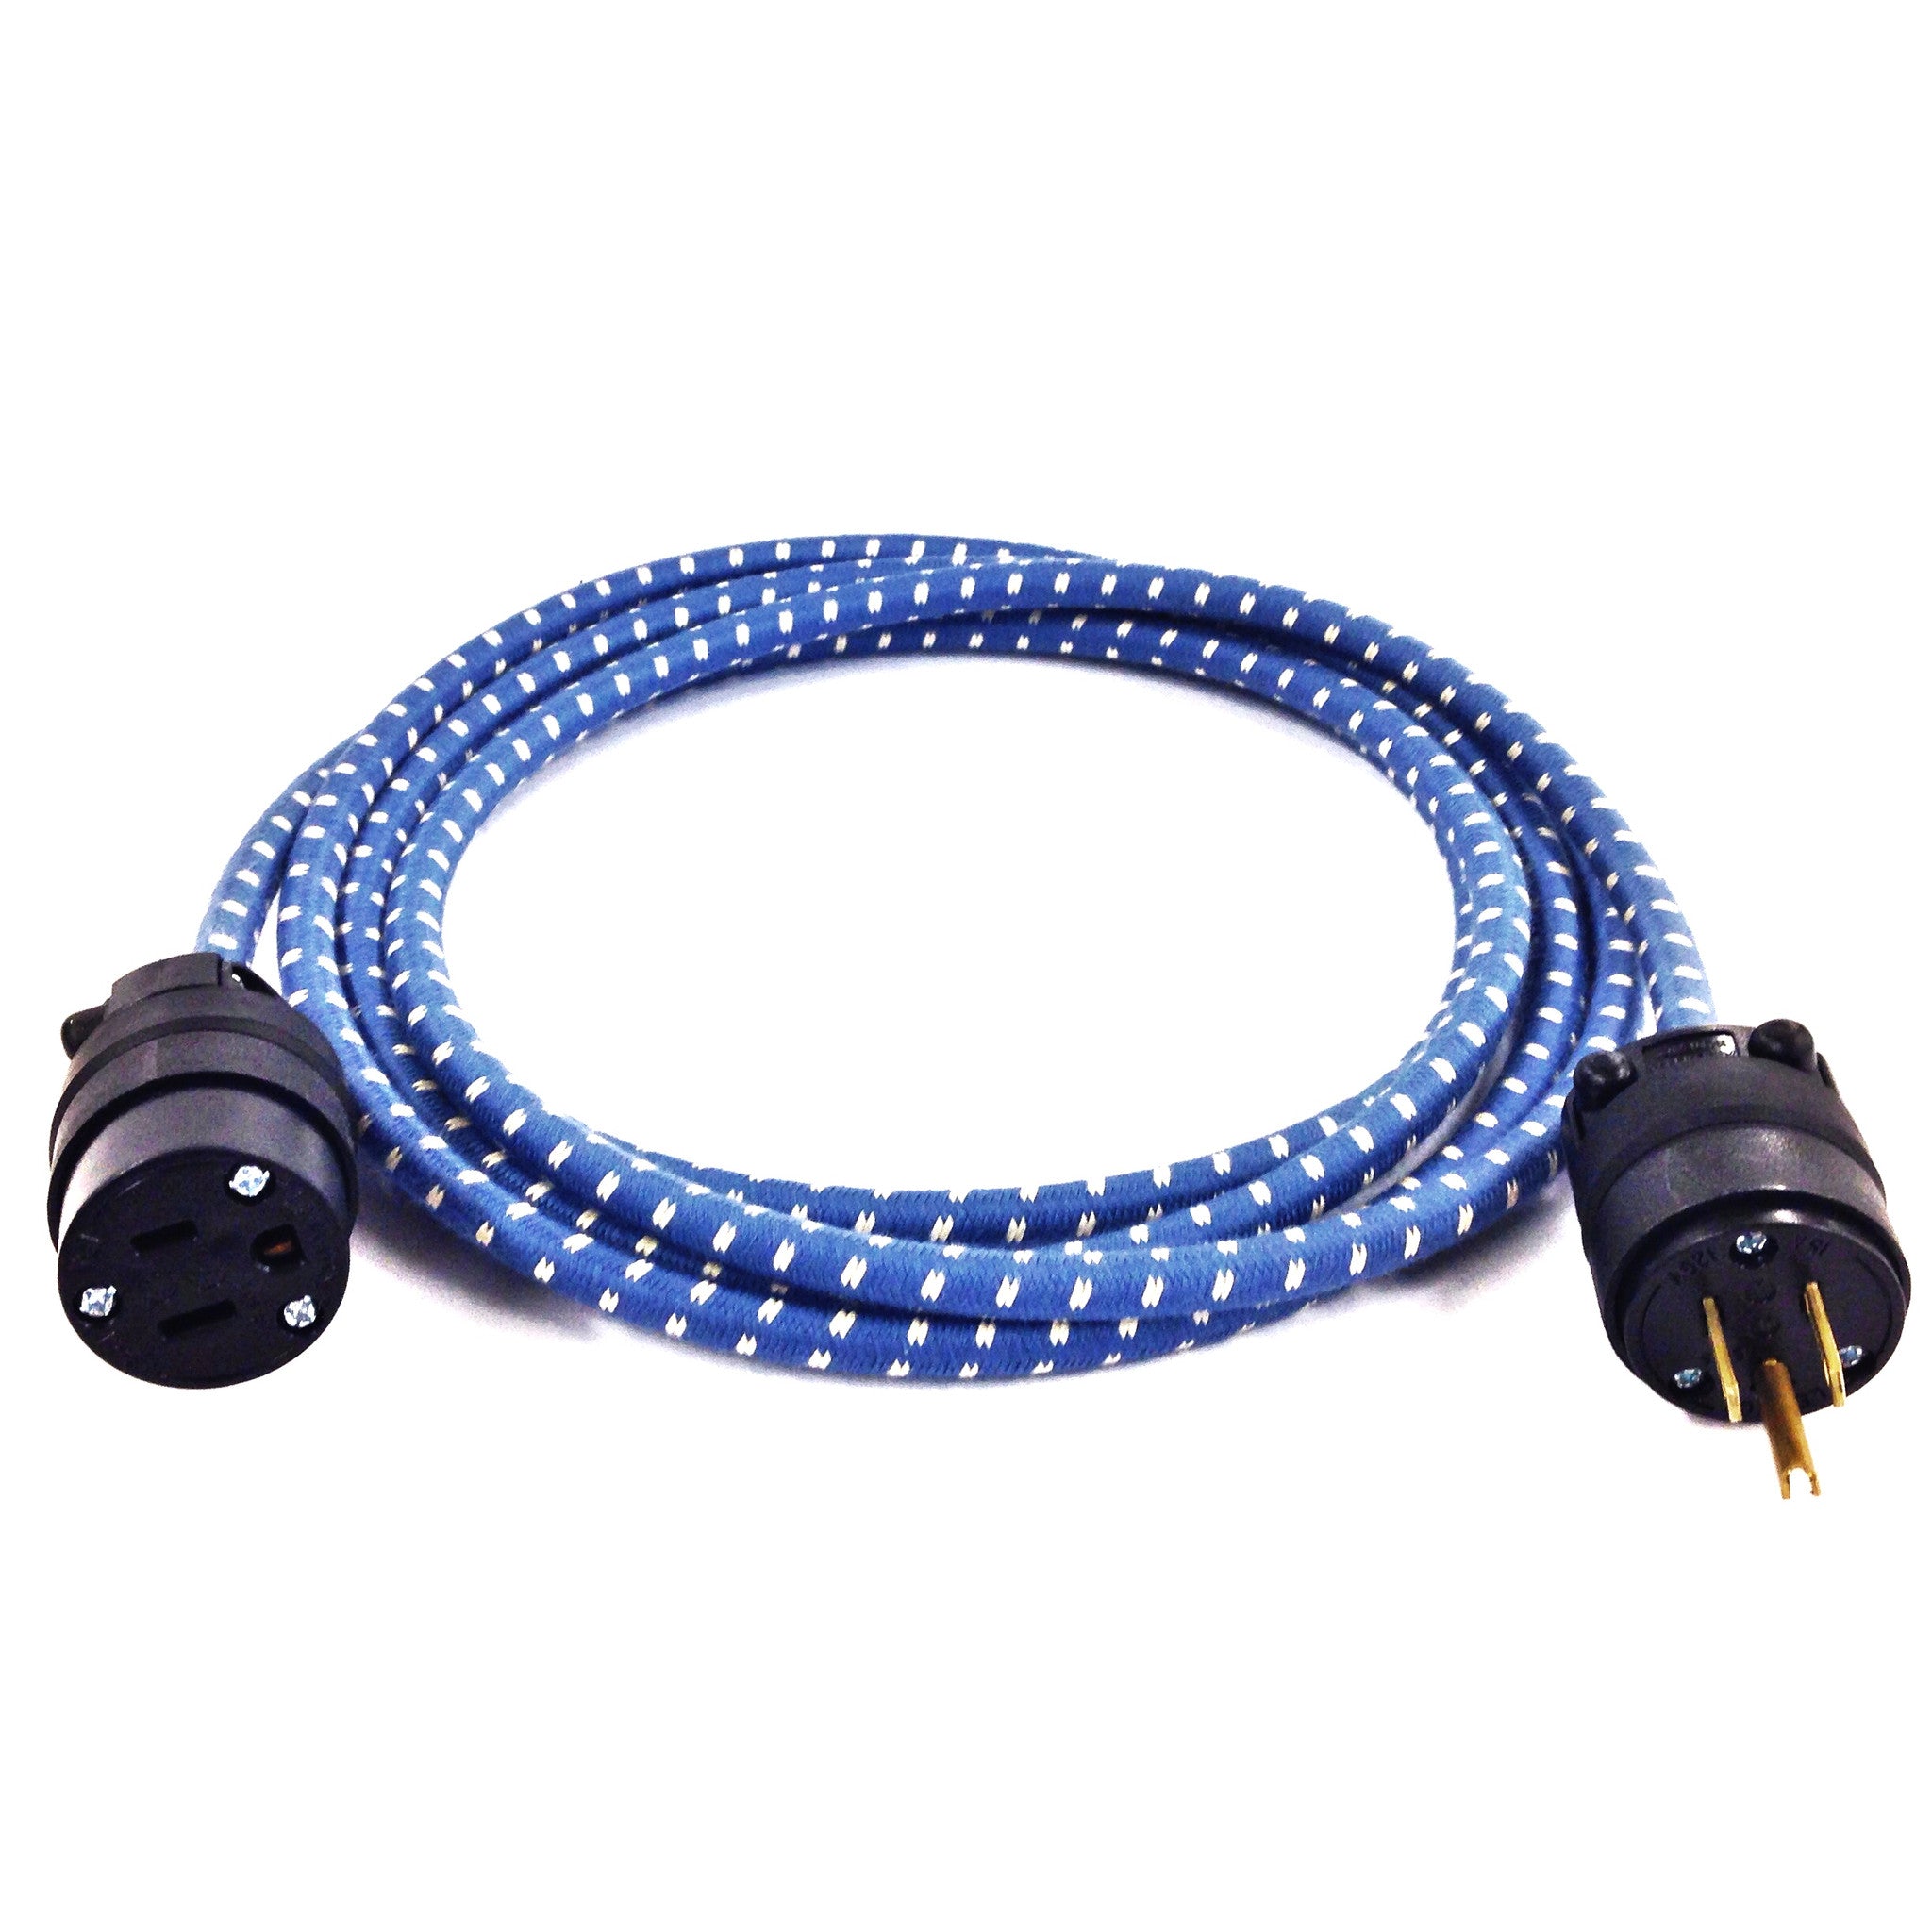 10' Extō Single Outlet Extension Cord - Solstice Blue & Natural White 15AMP Max